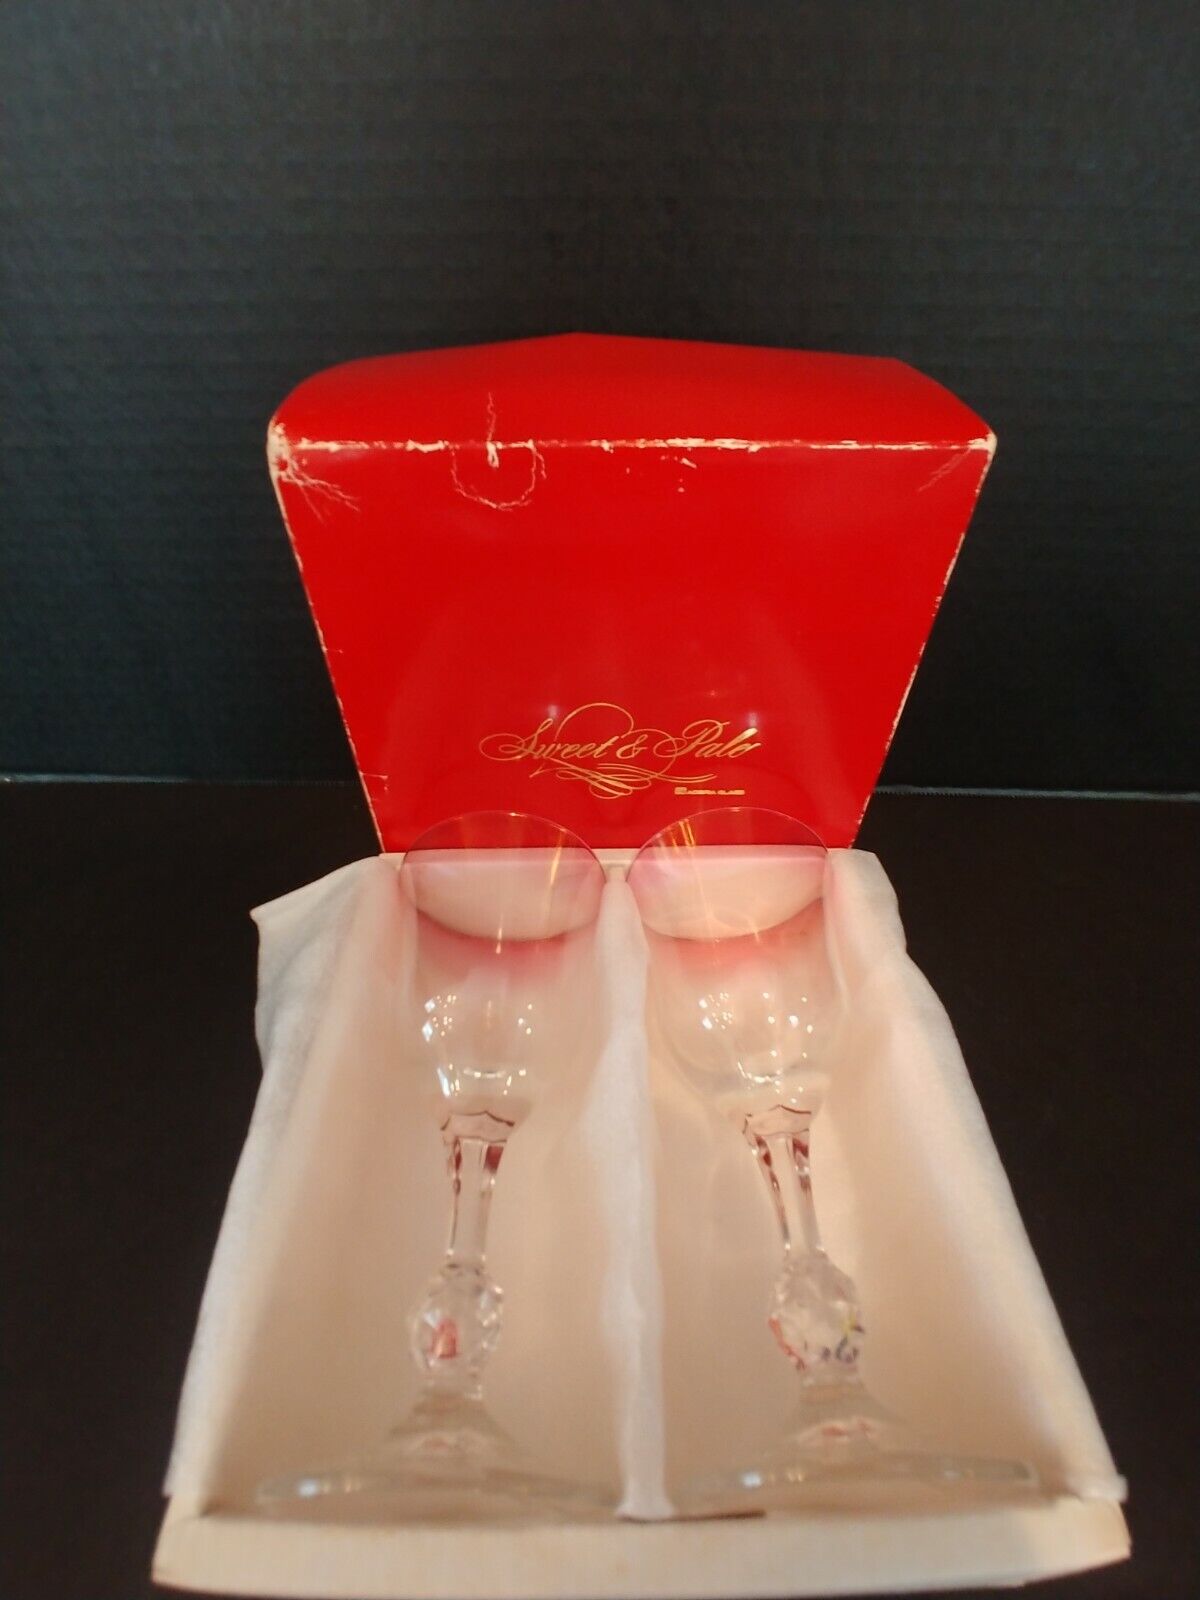 Aderia Japanese Crystal Glassware In Original Box. Rare. Collectable. Mint.